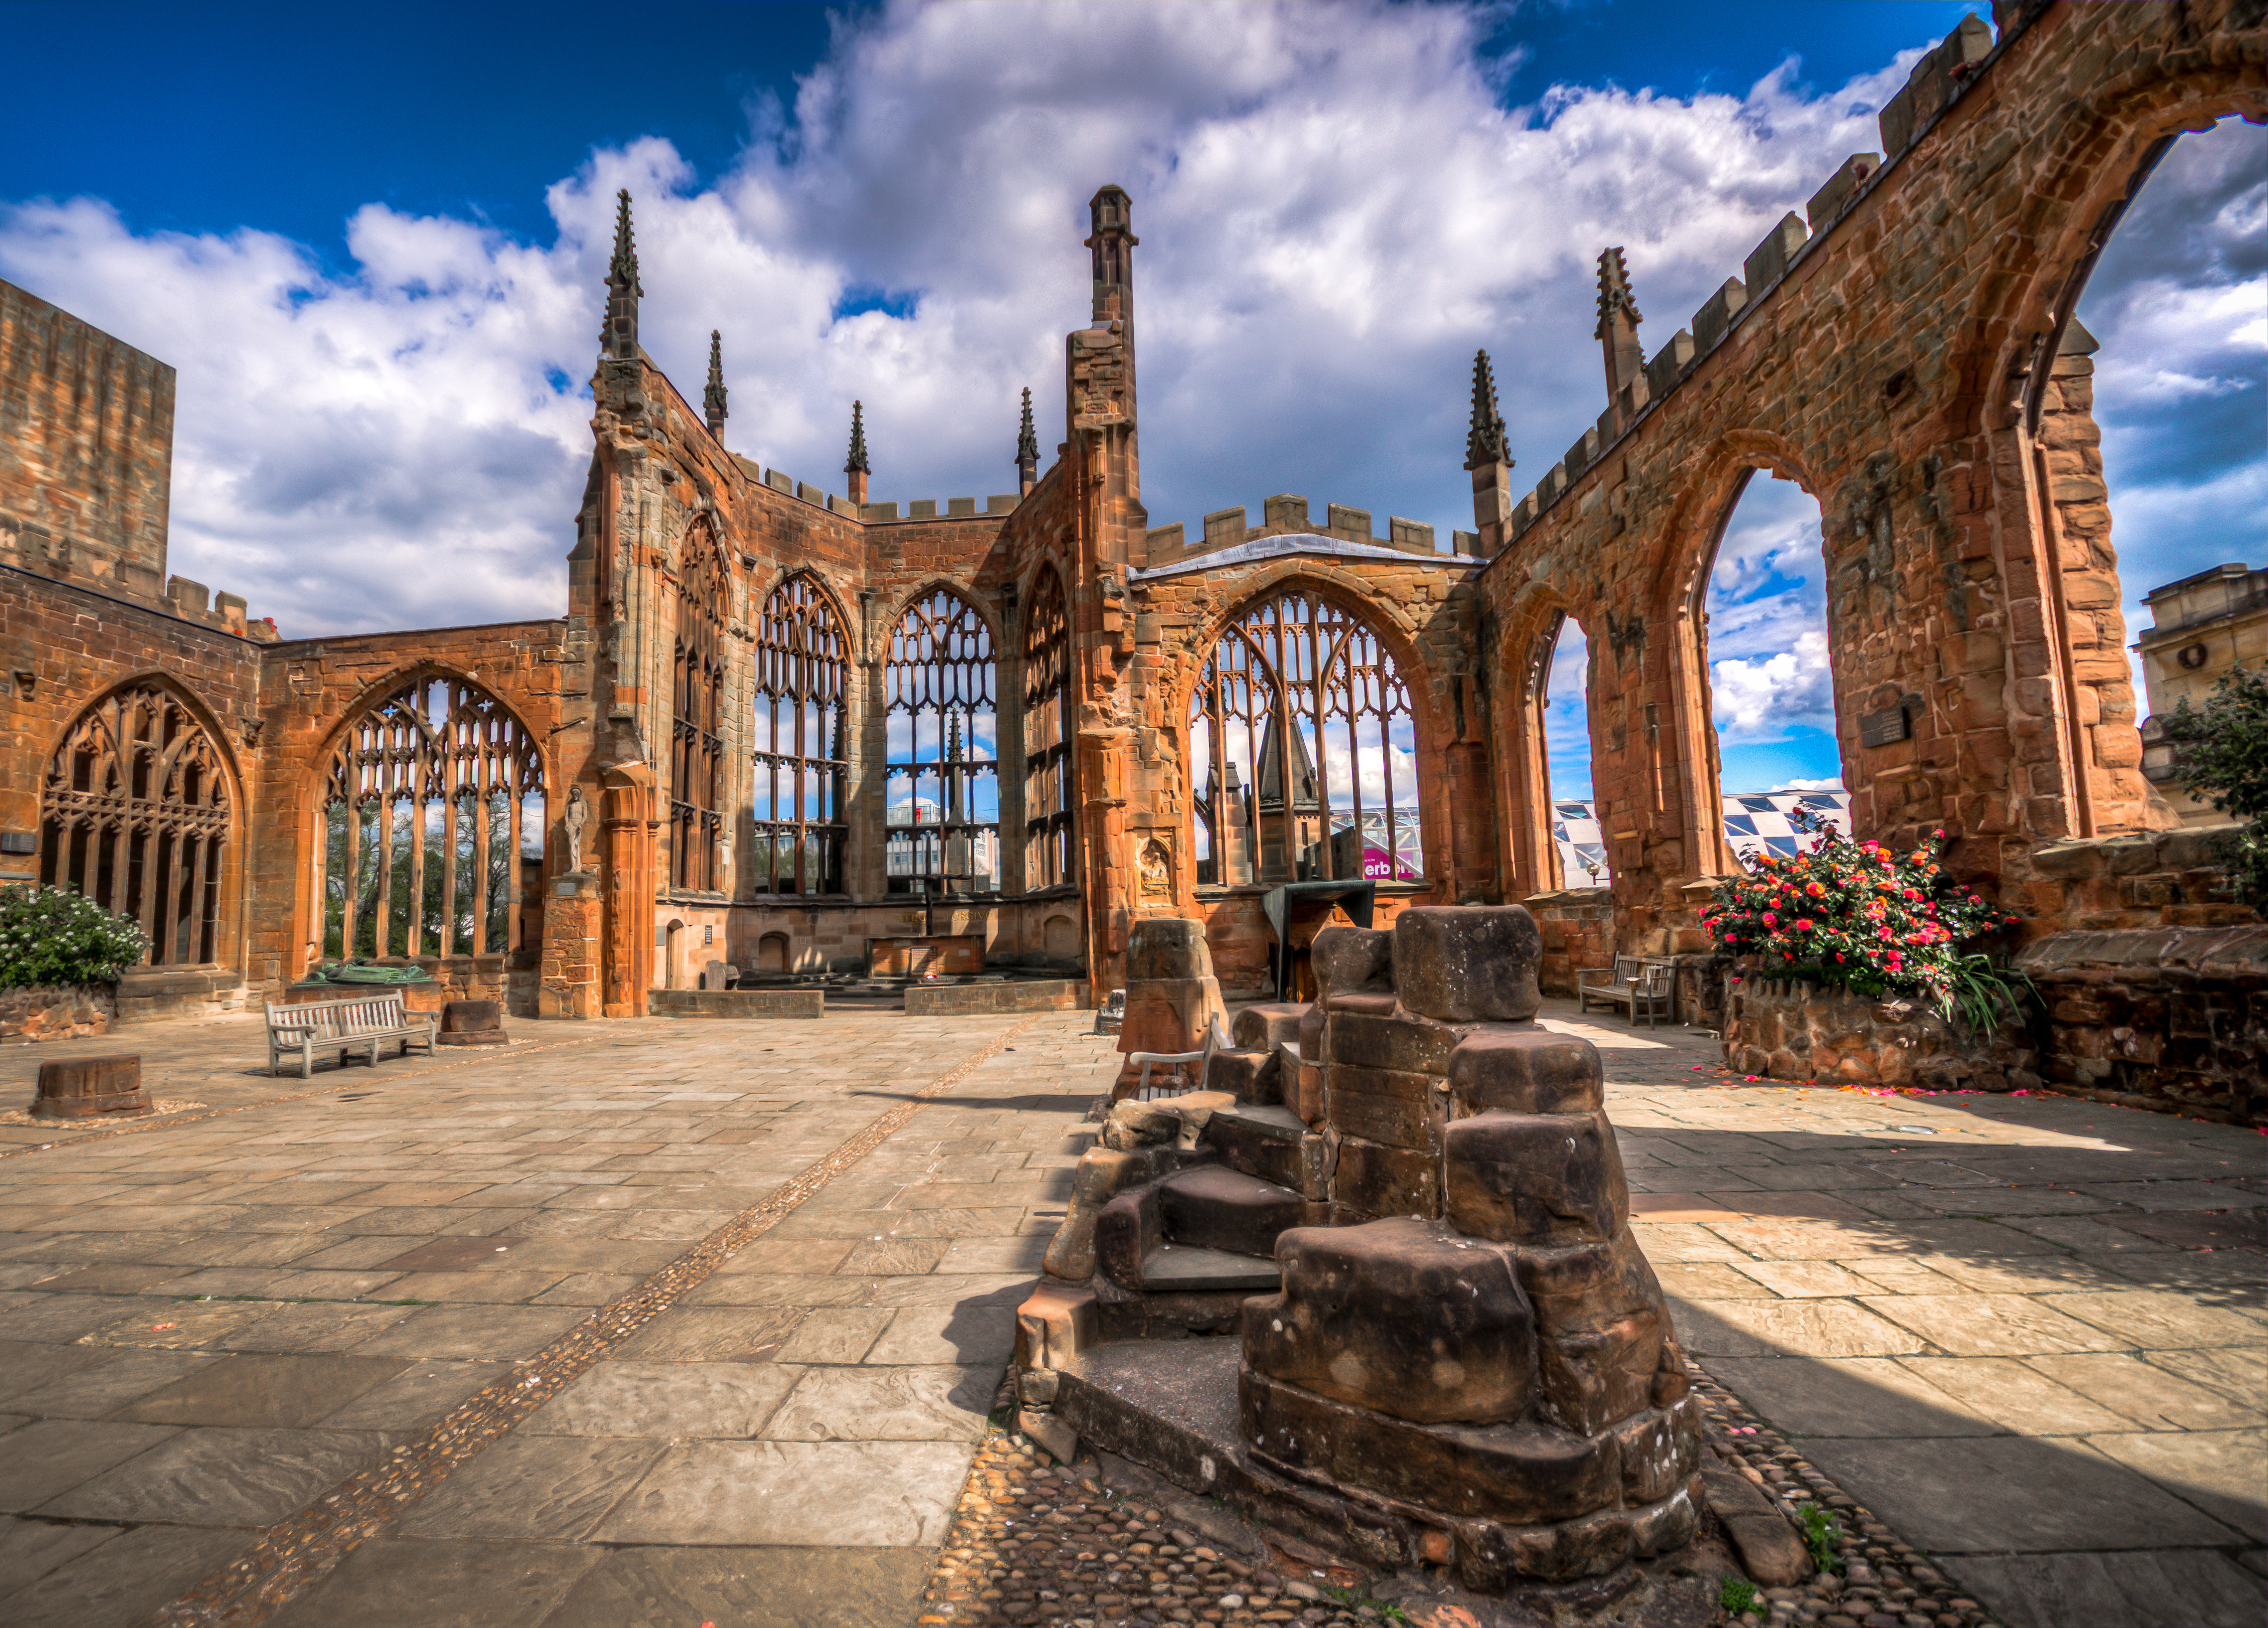 Wallpaper, landscape, building, sky, HDR, Nikon, arch, church, cathedral, ruins, tree, d sigma, nikond facade, sigma tonemapped, ancient history, historic site, middle ages, coventry, hacienda, medieval architecture, stmichaels